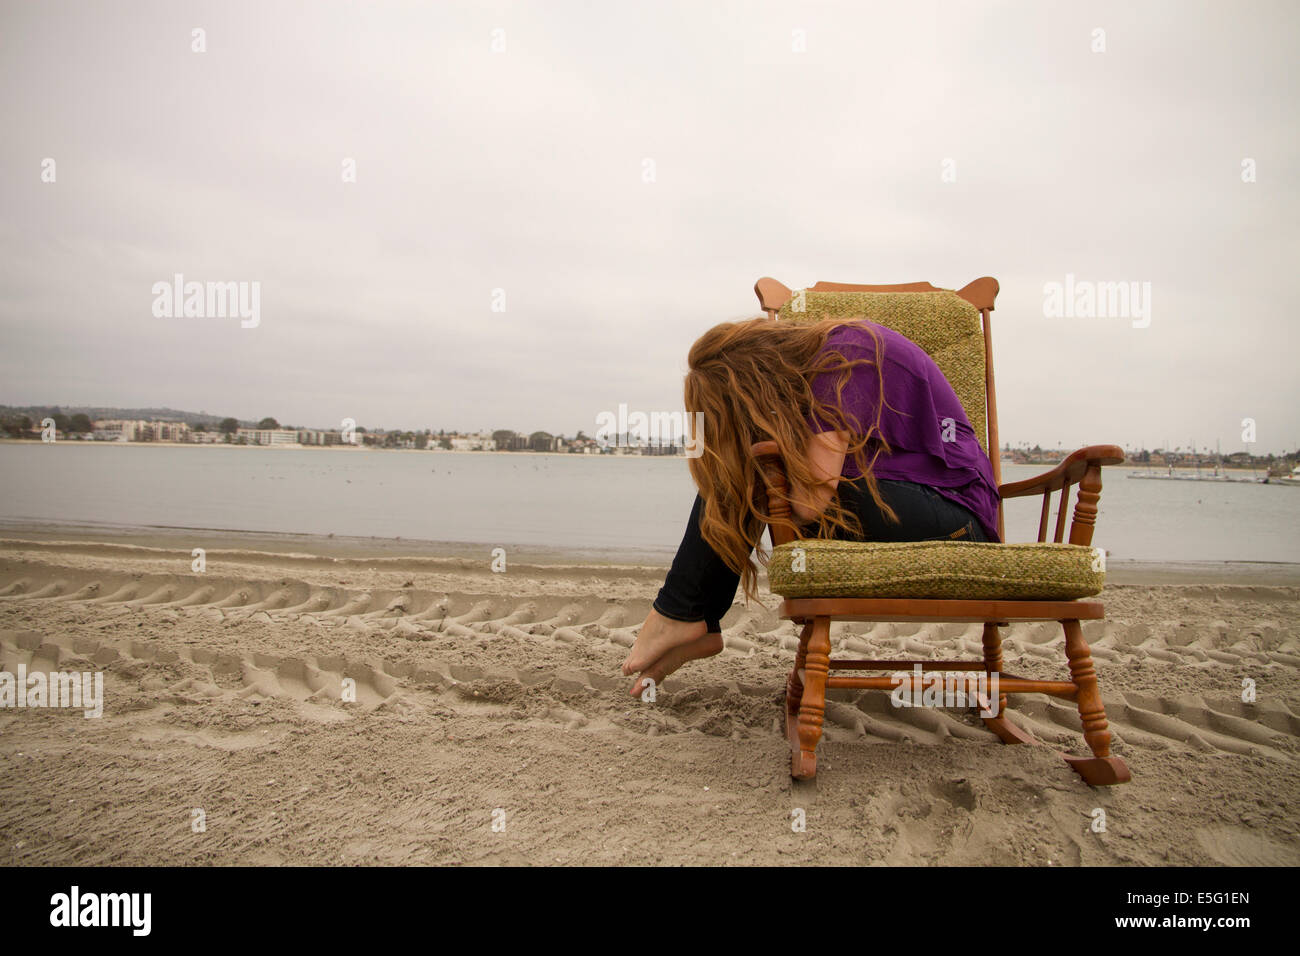 Portrait of young woman sitting in chair at beach Stock Photo